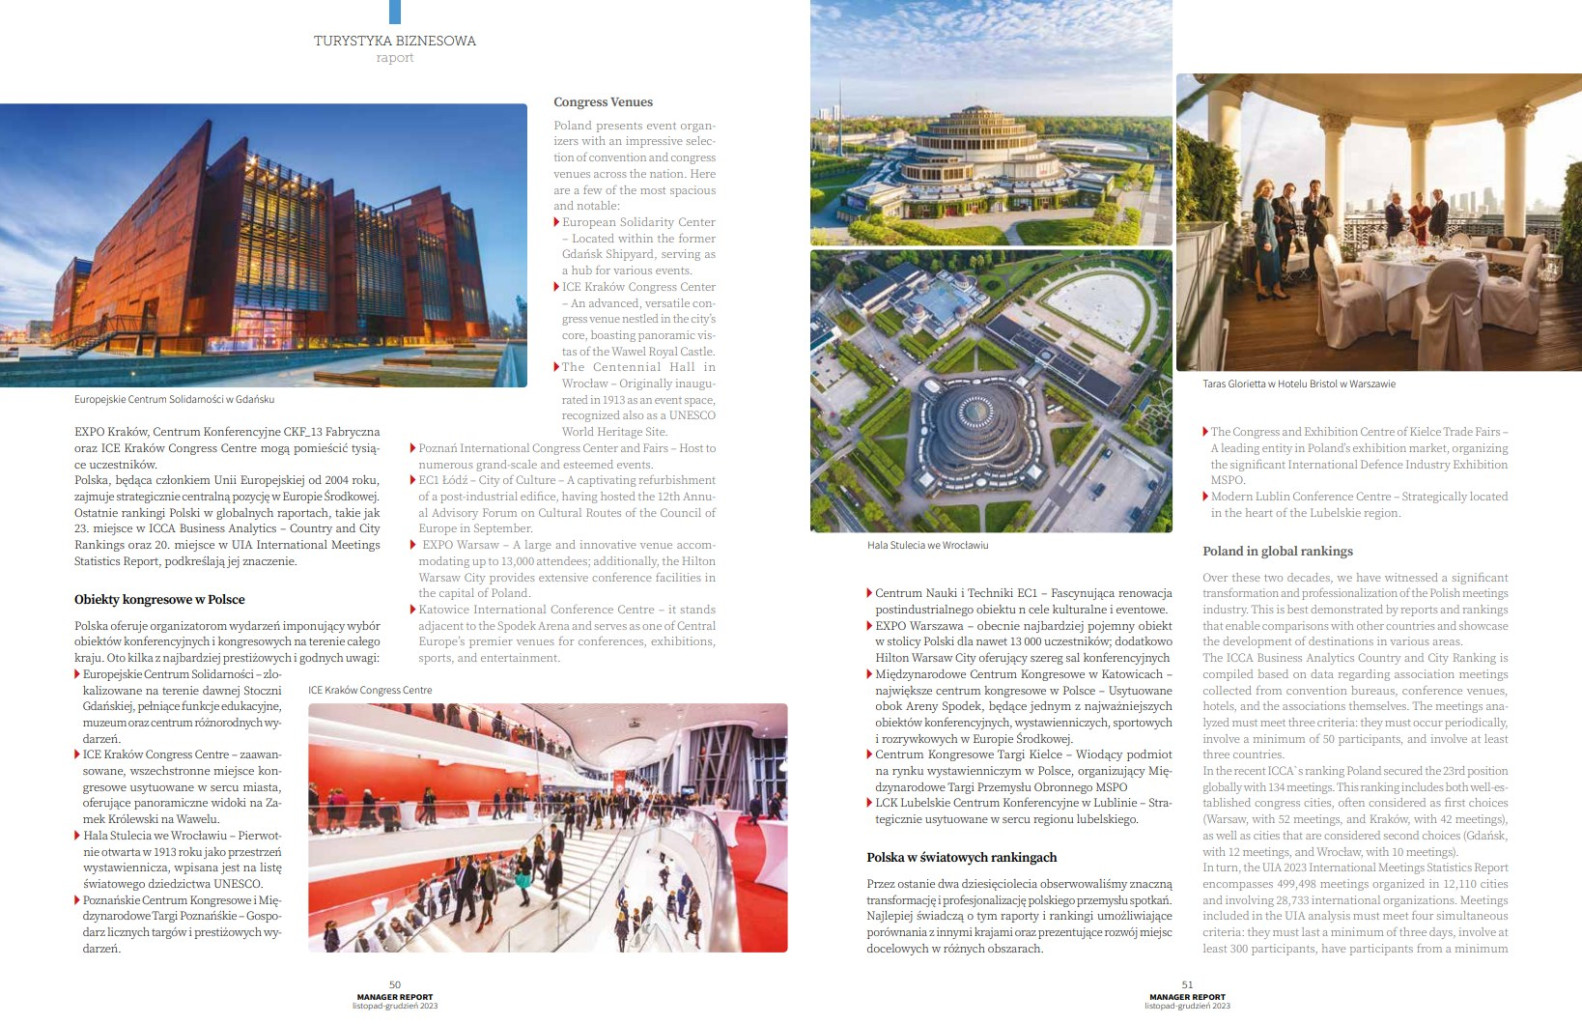 Wroclaw Manager Report MICE Poland Convention Bureau